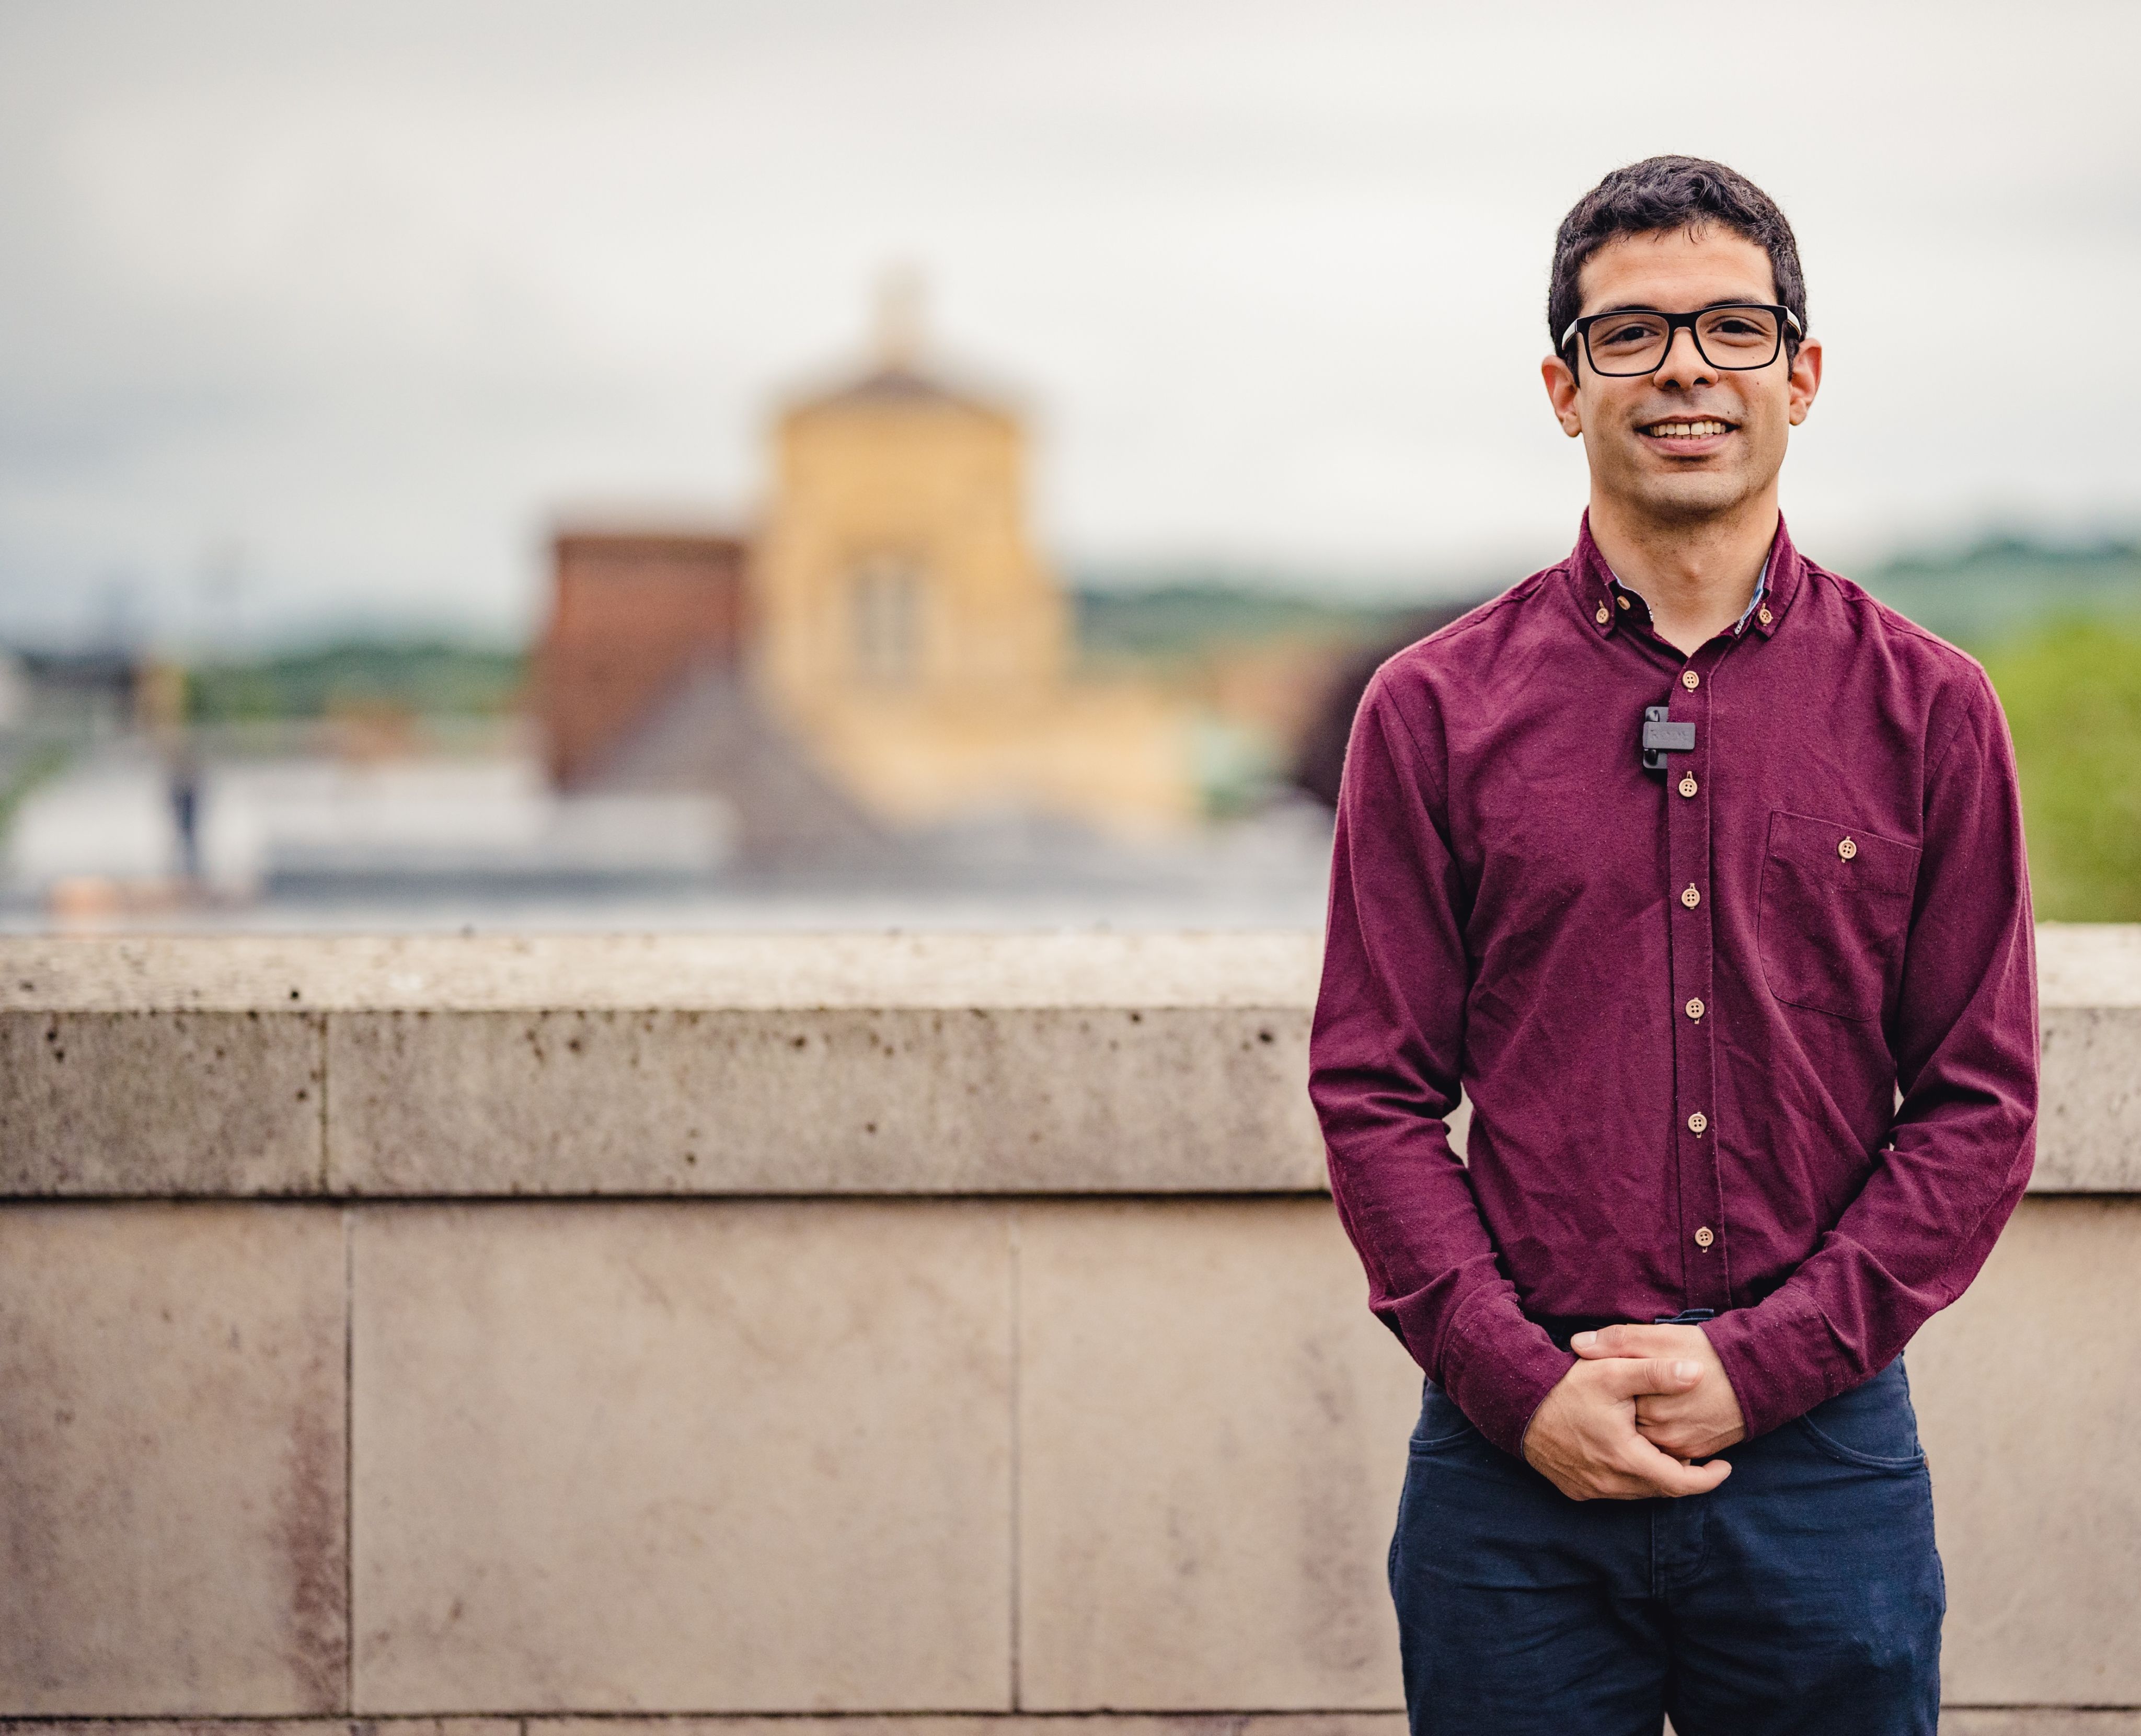 Dr Idris Kempf: a young man wearing glasses and a purple shirt. He stands in front of a stone wall with rooftops and buildings in the background.